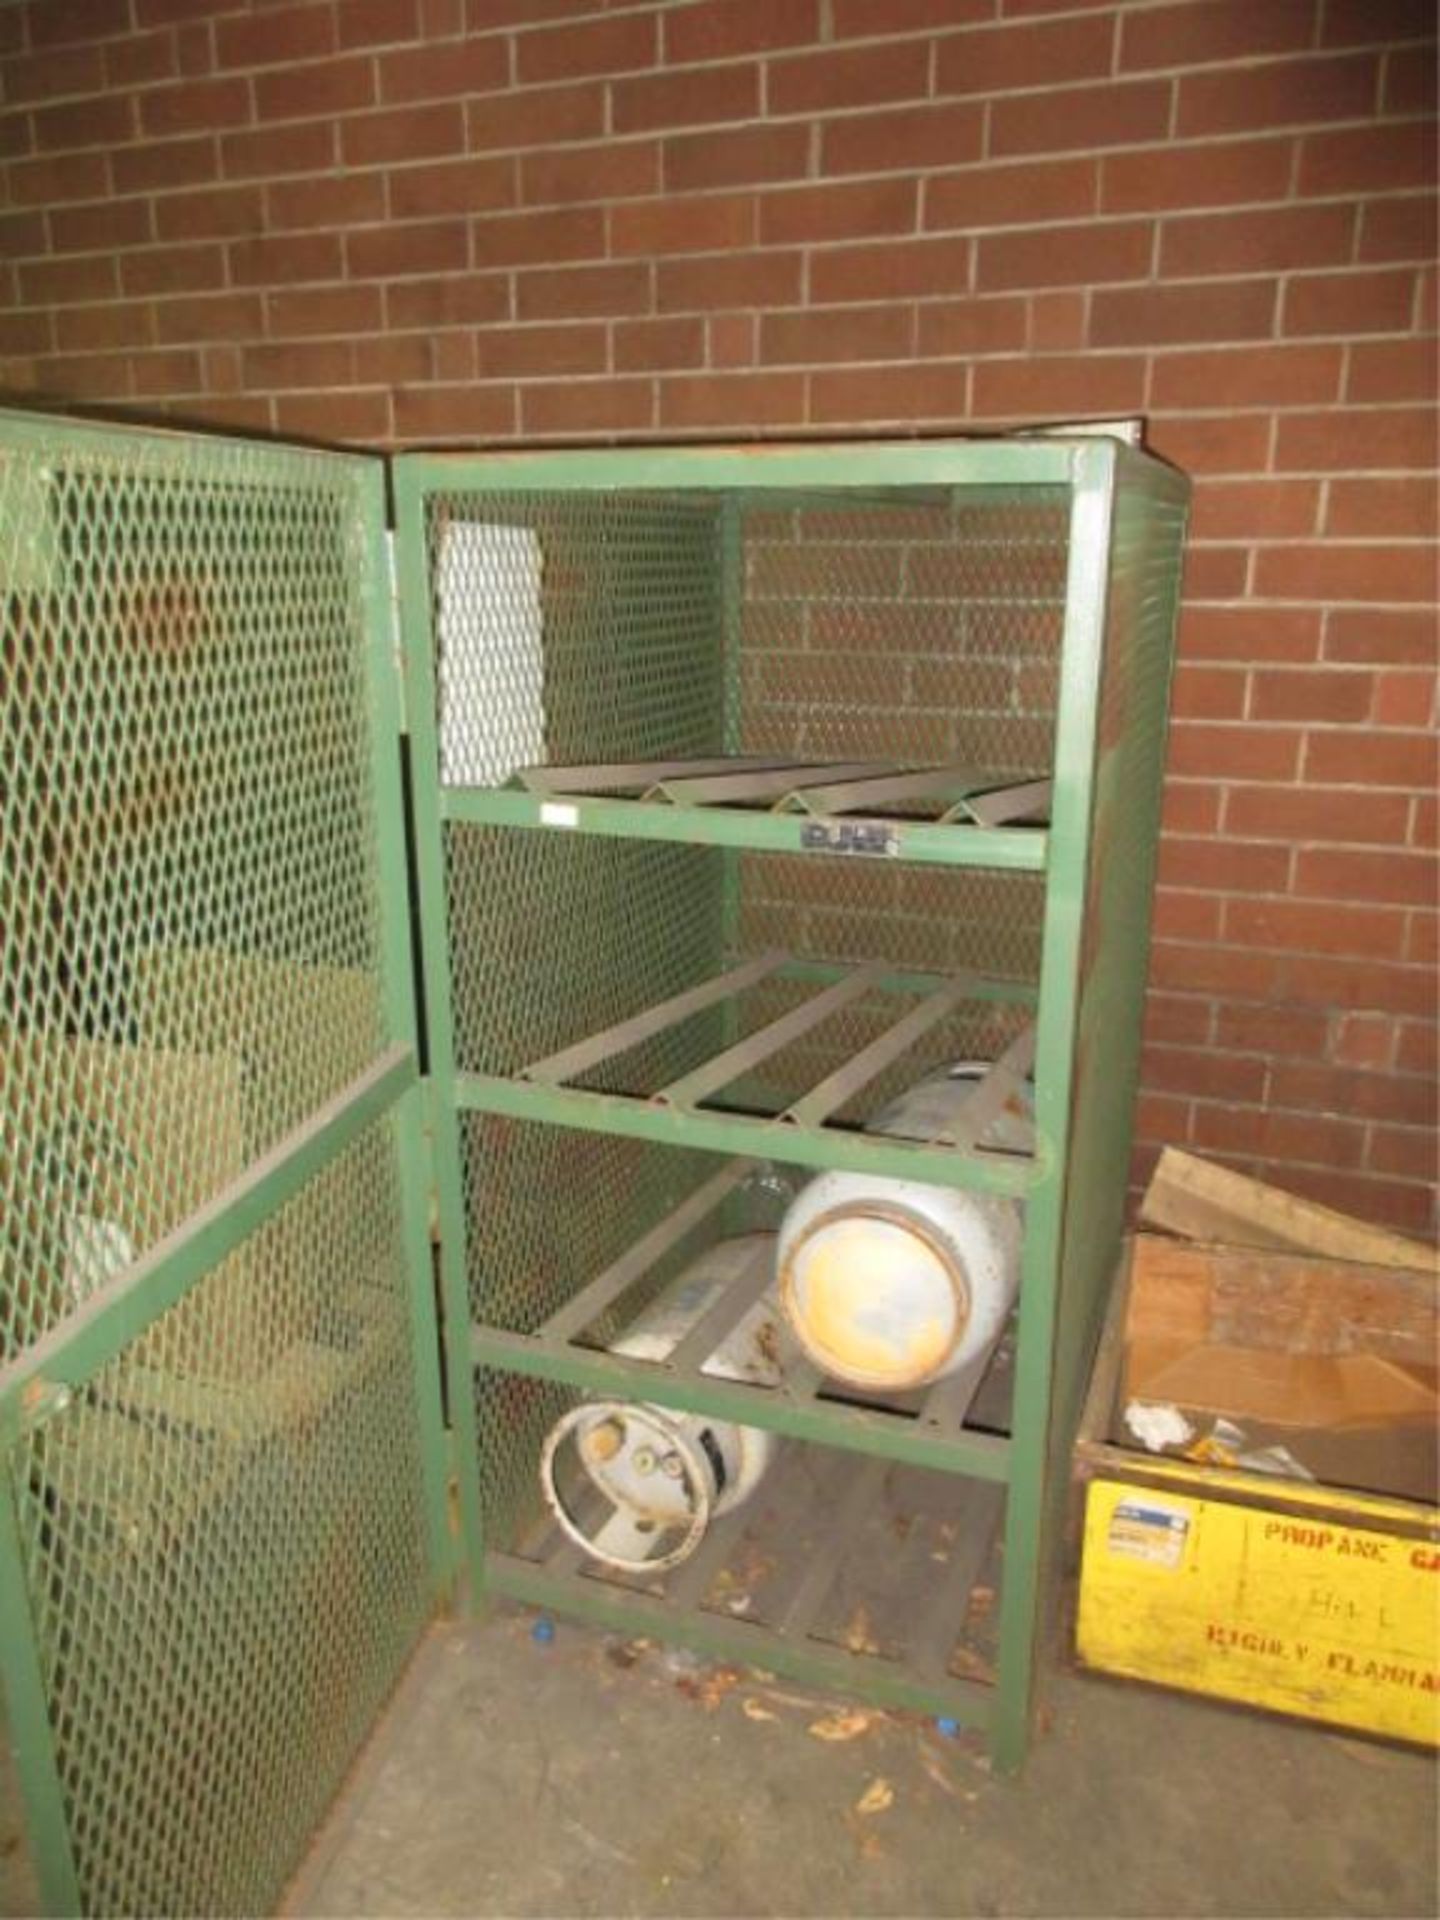 Saf T Cart Propane Safety Storage Rack, tanks not included. HIT# 2179368. whse 3. Asset Located at - Image 2 of 2